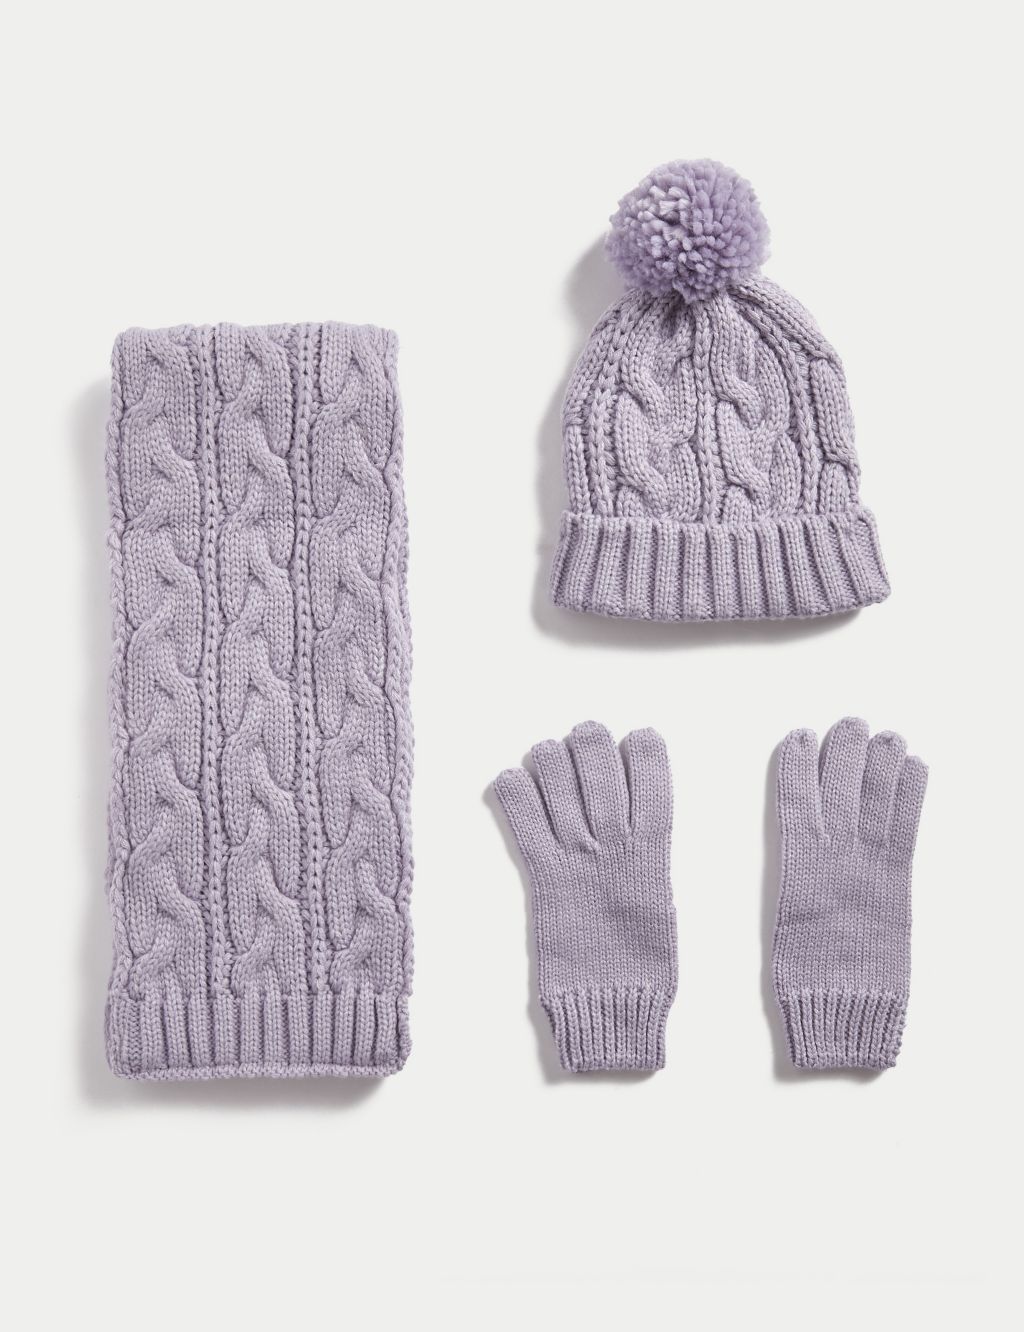 Cream Cable Knit Scarf Hat & Gloves Set